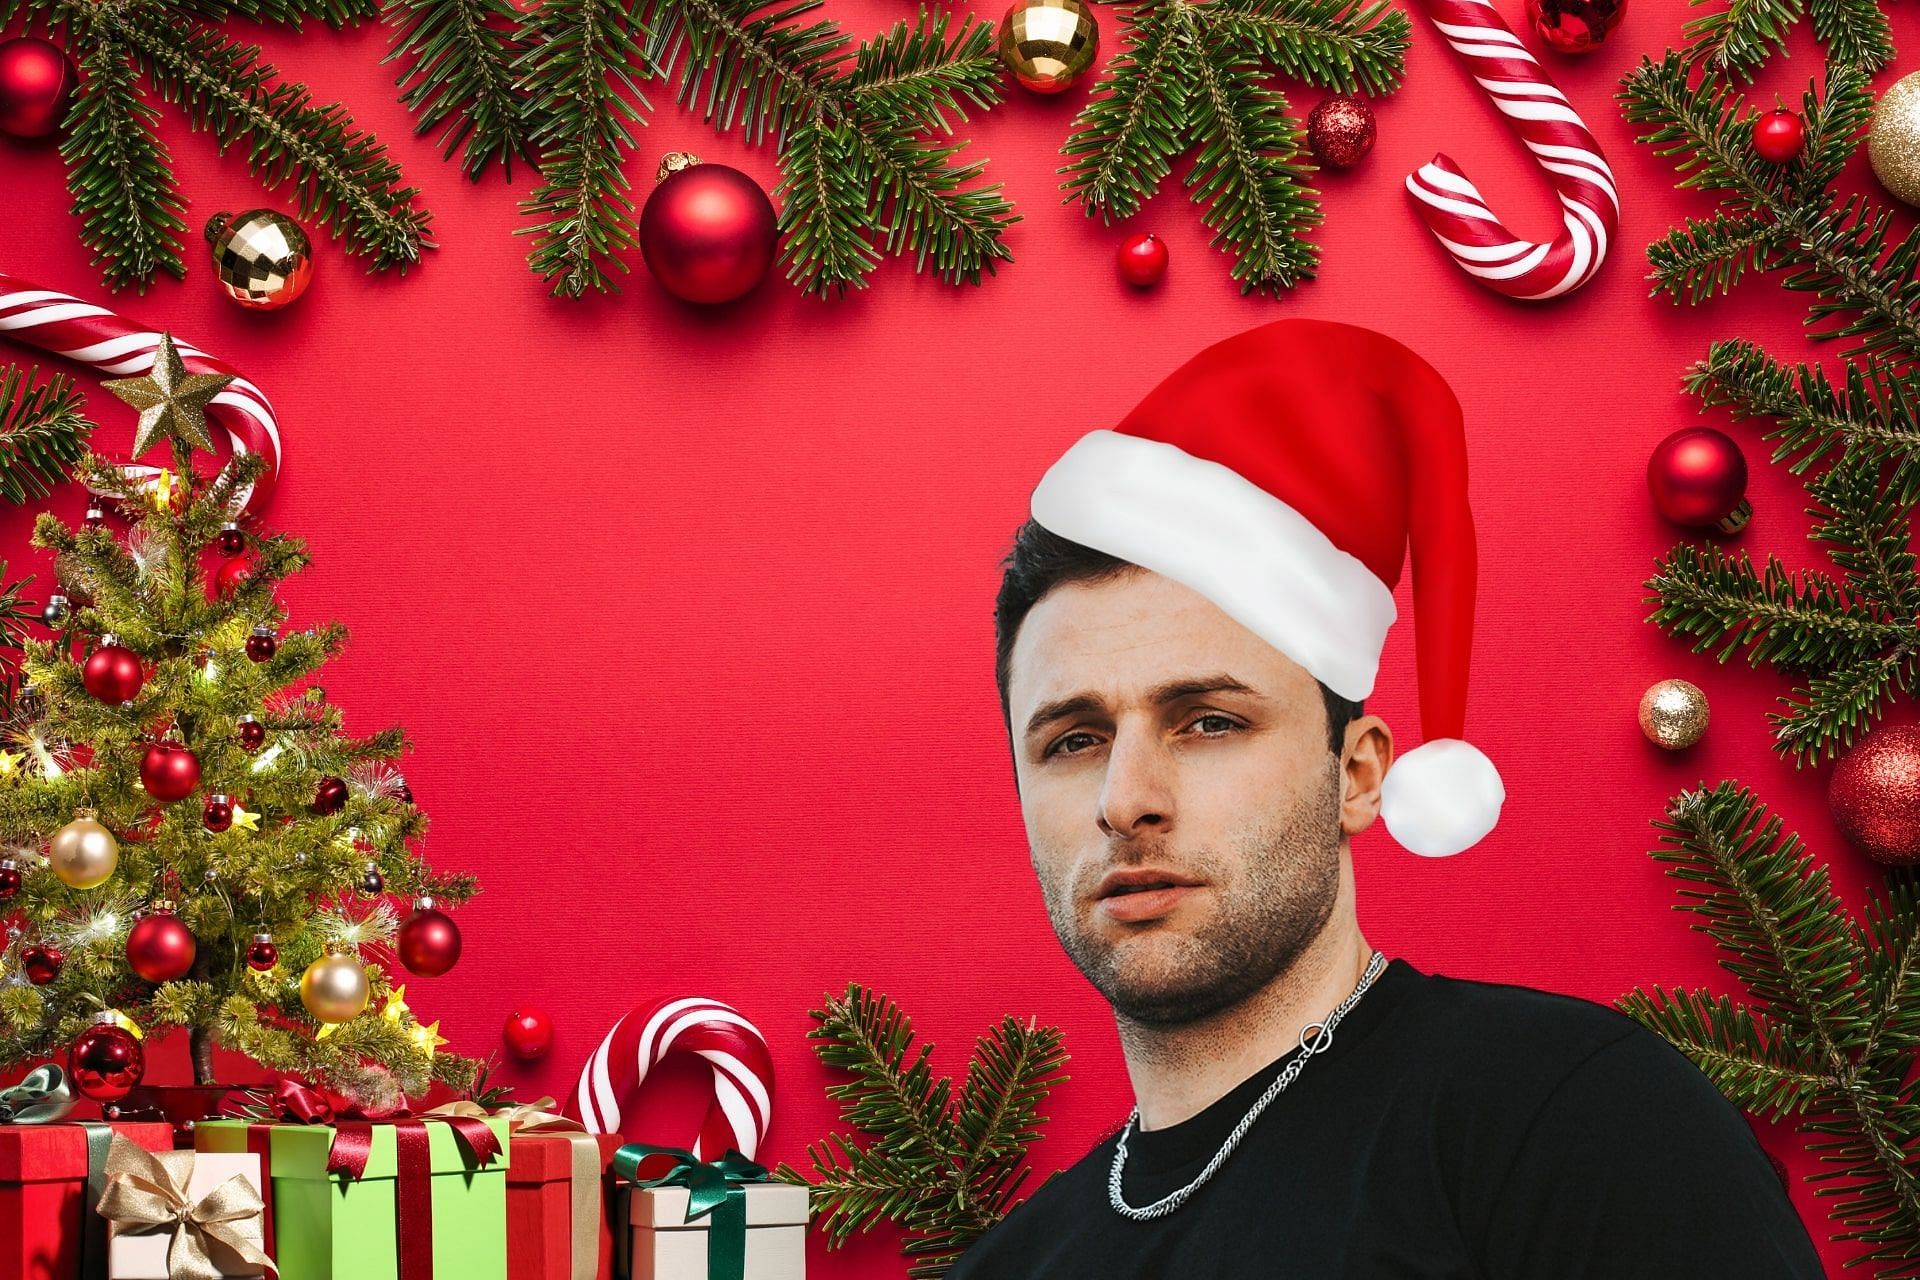 Santa Claus comes early as Twitch streamer AustinShow comes bearing gifts for fans (Image via Sportskeeda)